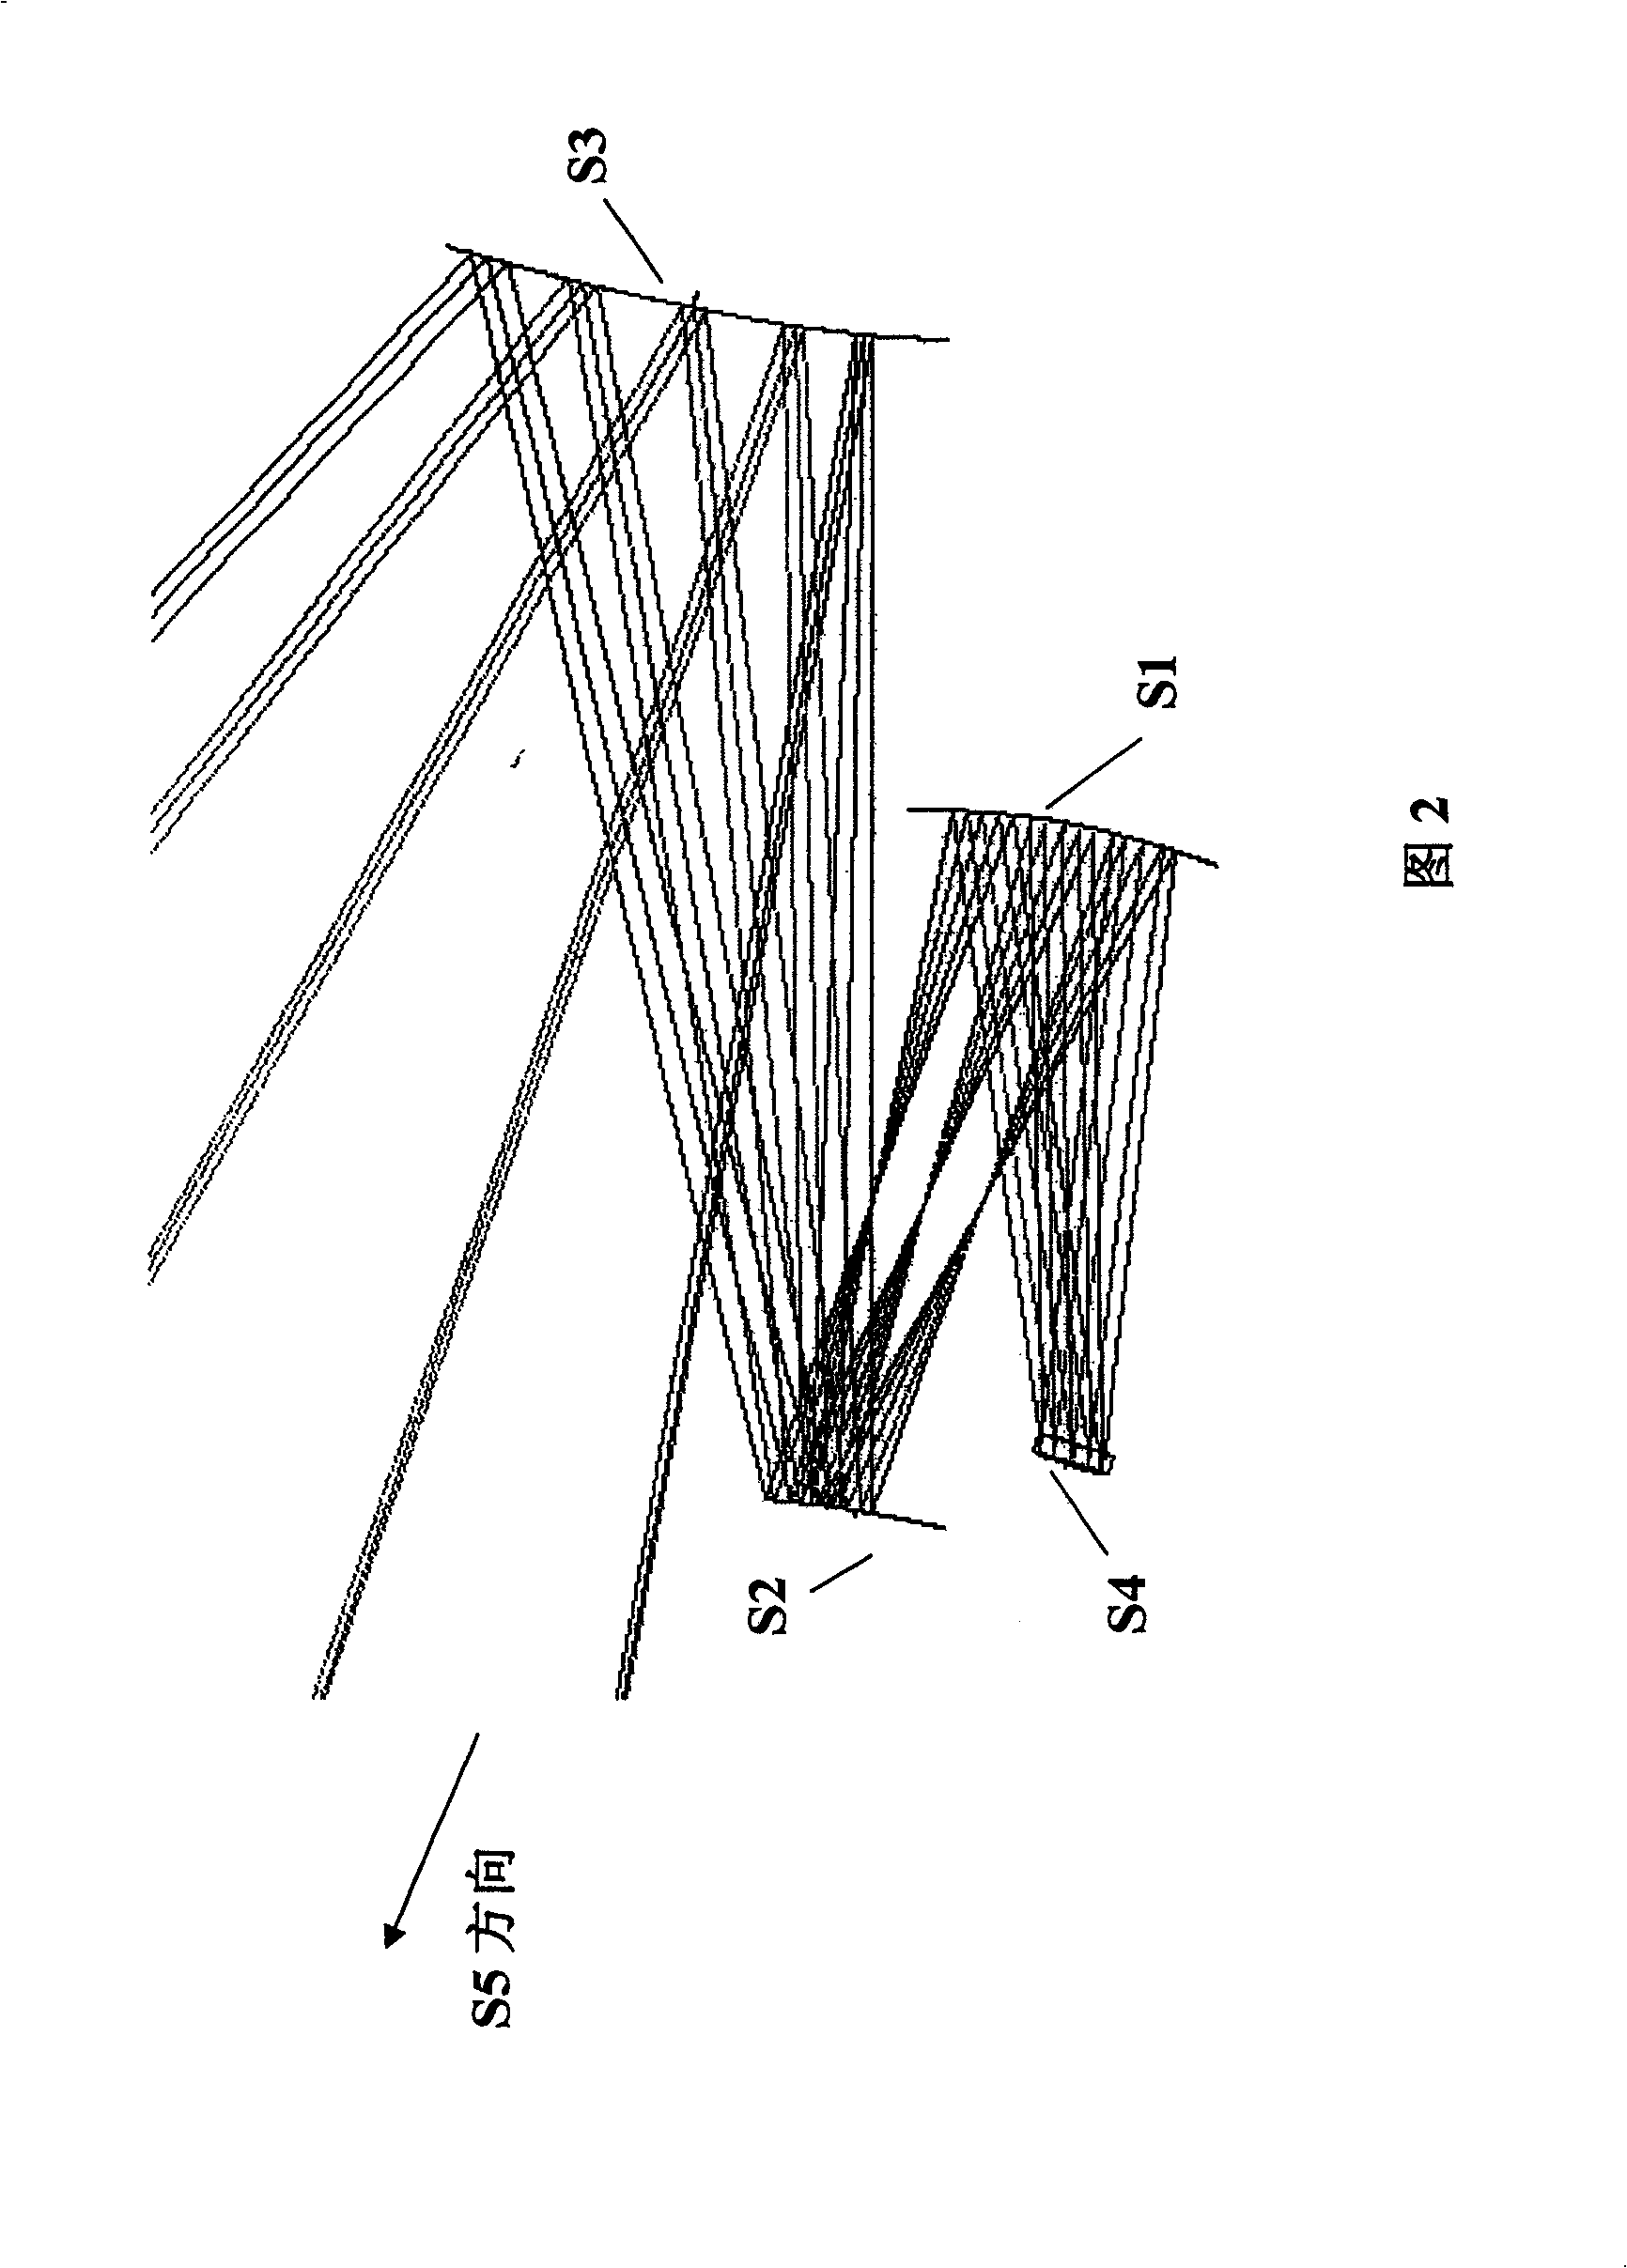 Super thin reflective projection display imaging method and objective lens based on free camber